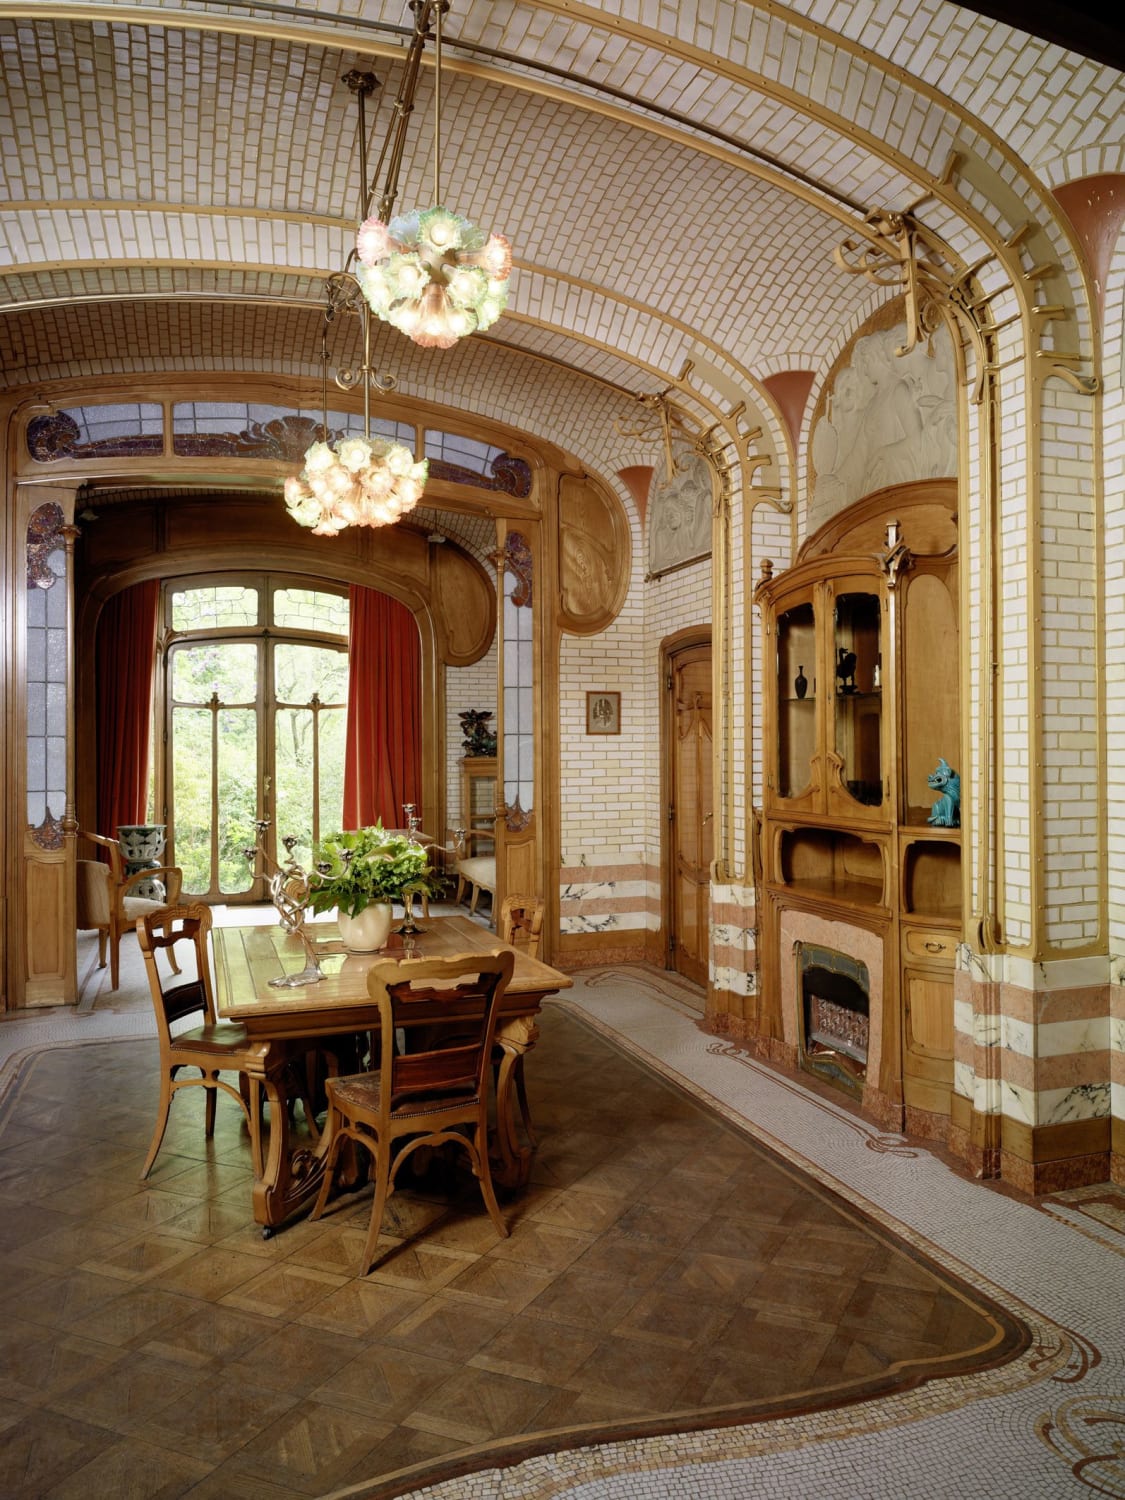 Dining room in Maison & Atelier Horta, the former house and workshop of Belgian Art Nouveau architect Victor Horta completed in 1901, now used as a museum. Saint-Gilles, Brussels-Capital Region, Belgium